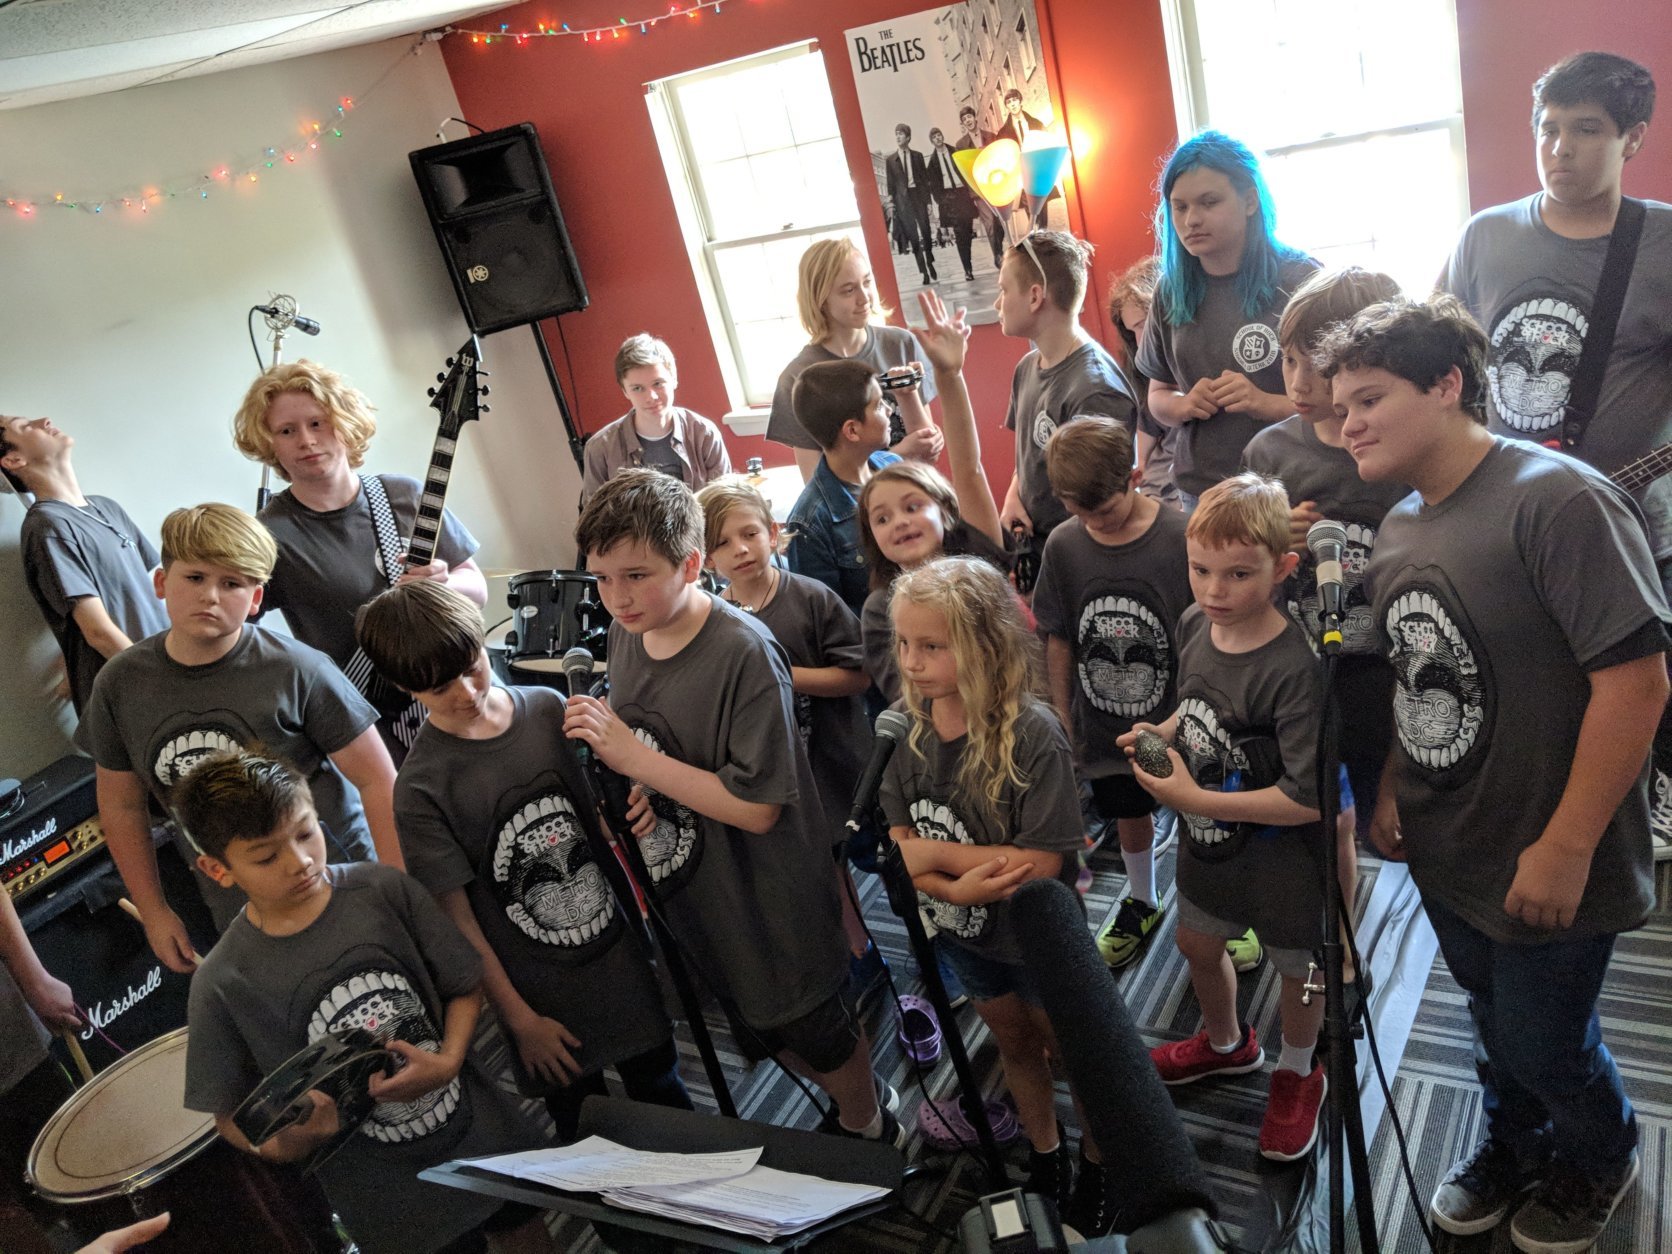 This bunch comprises two different summer camps running at the School of Rock in Vienna, Virginia. One is more advanced. The other is for the "rookies."(WTOP/Jack Pointer)